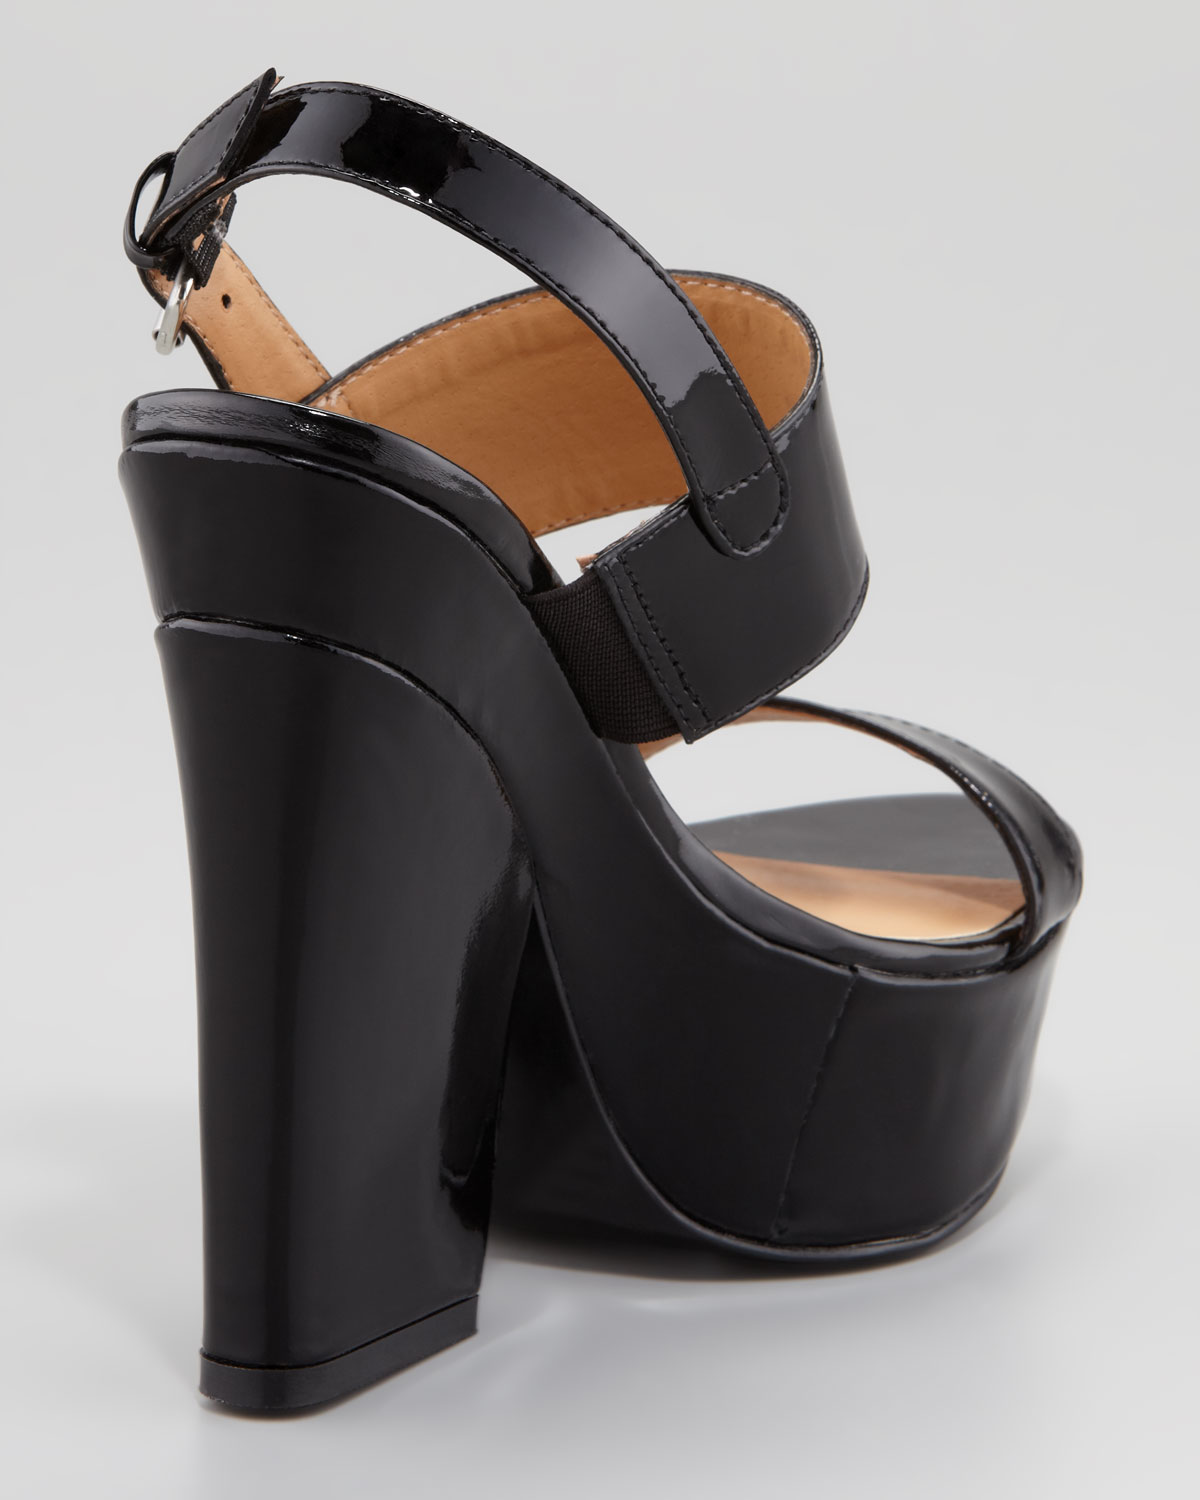 Lyst - Kelsi dagger brooklyn Holly Patent Leather Wedge Sandal in Black